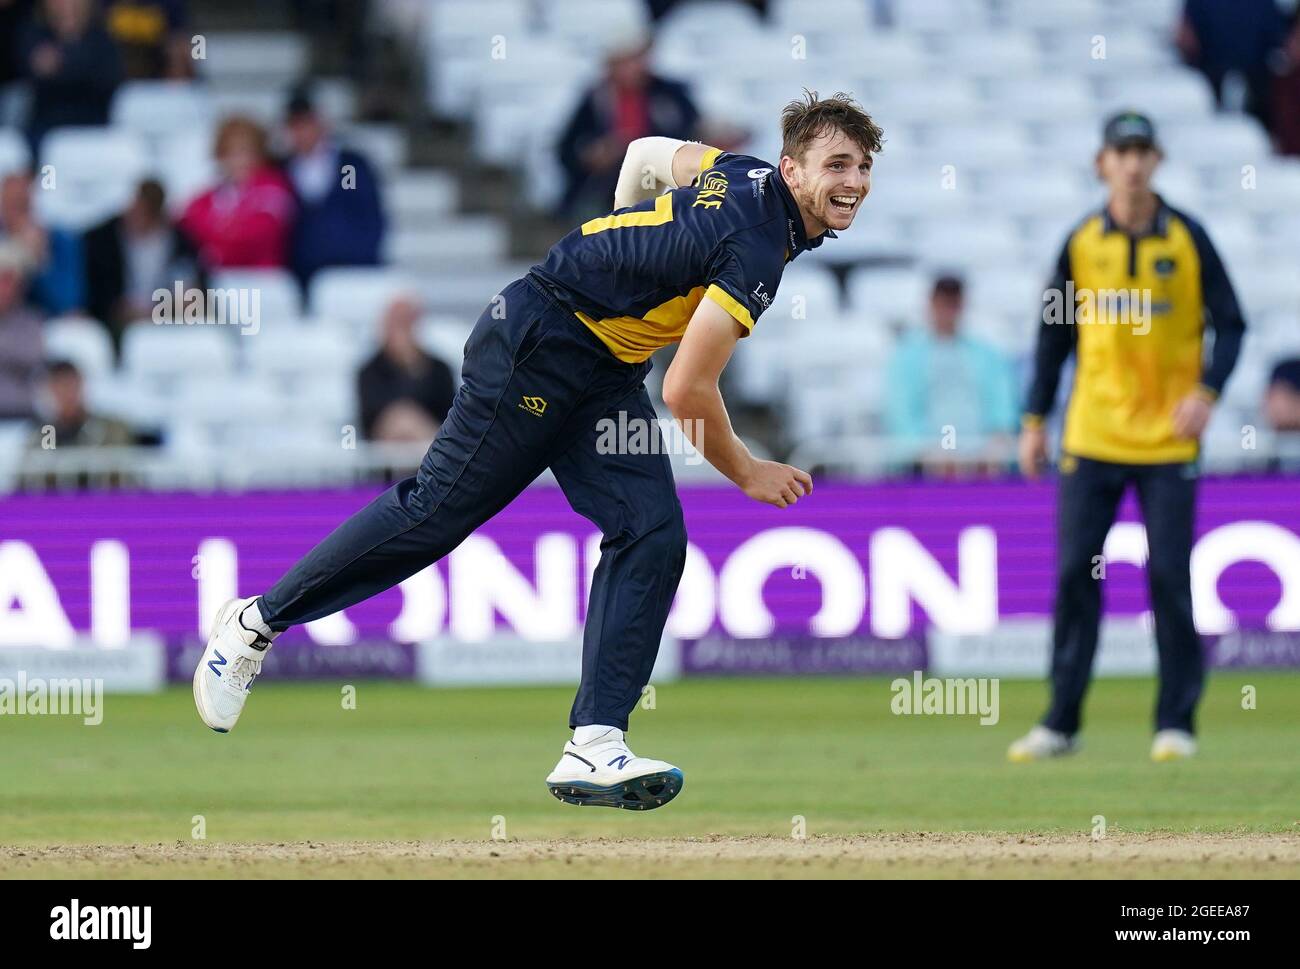 Glamorgan's Joe Cooke bowling during the Royal London One-Day Cup Final at Trent Bridge, Nottingham. Picture date: Thursday August 19, 2021. See PA story CRICKET Final. Photo credit should read: Zac Goodwin/PA Wire. RESTRICTIONS: No commercial use without prior written consent of the ECB. Still image use only. No moving images to emulate broadcast. Editorial use only. No removing or obscuring of sponsor logos. Stock Photo